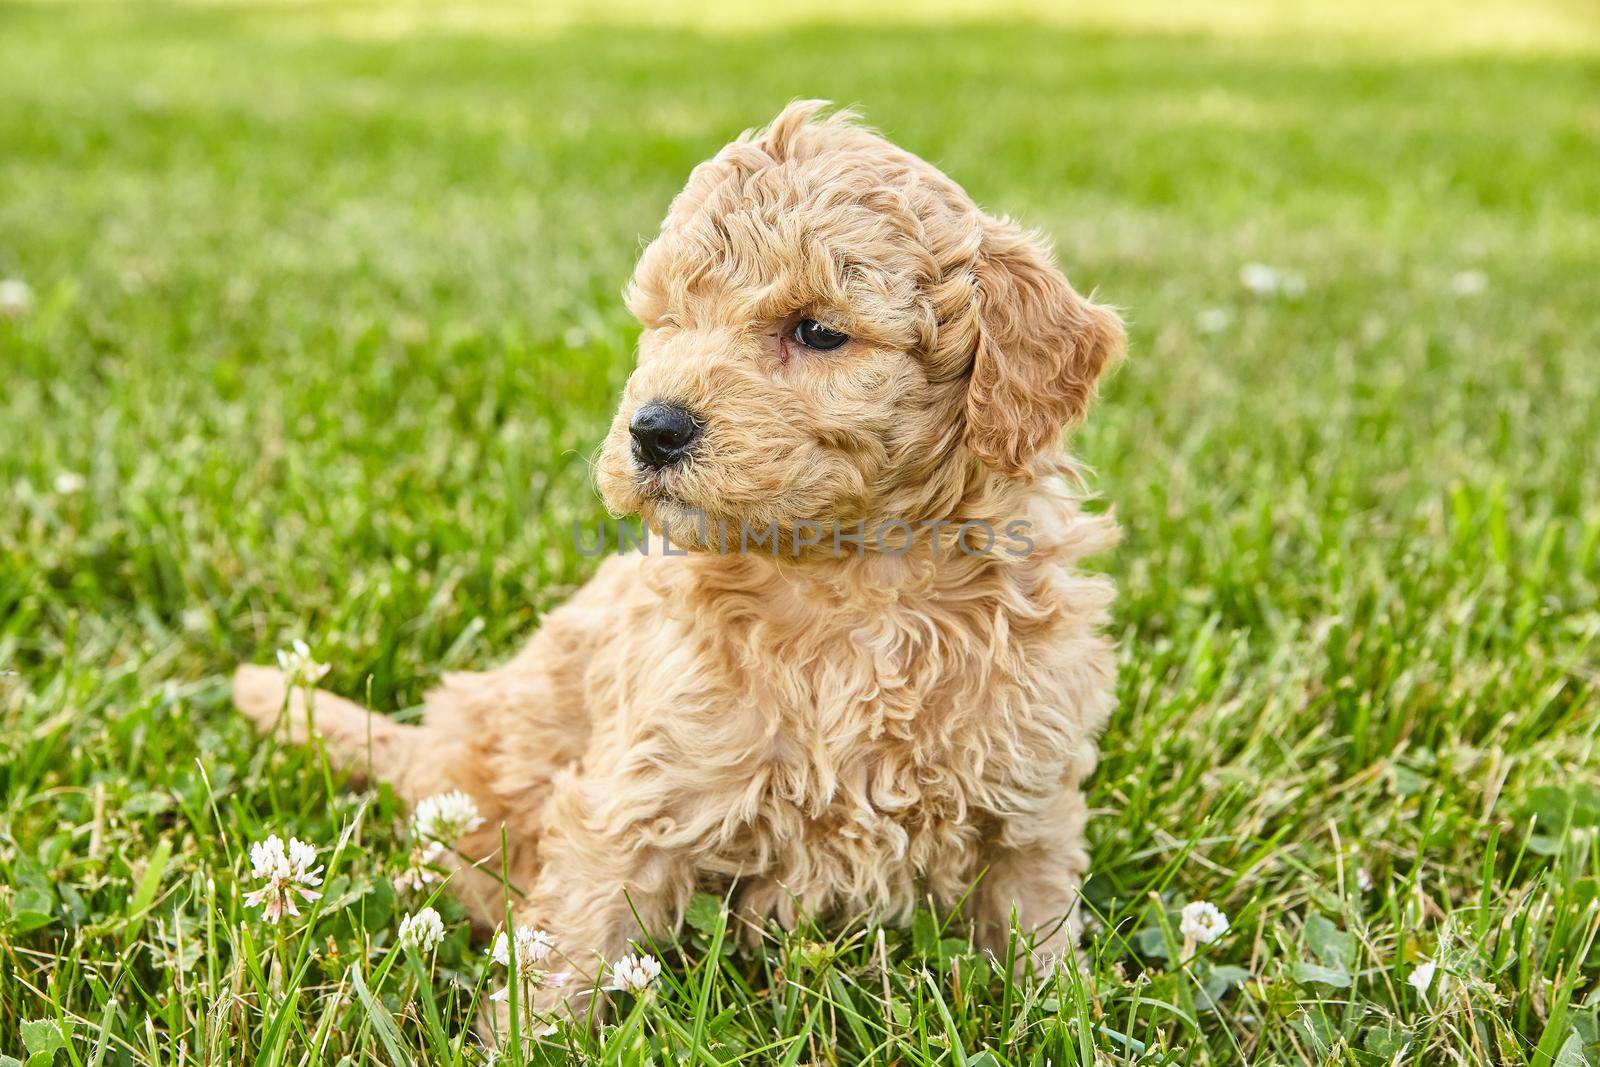 Image of Goldendoodle puppy of light brown sitting and glaring in grass